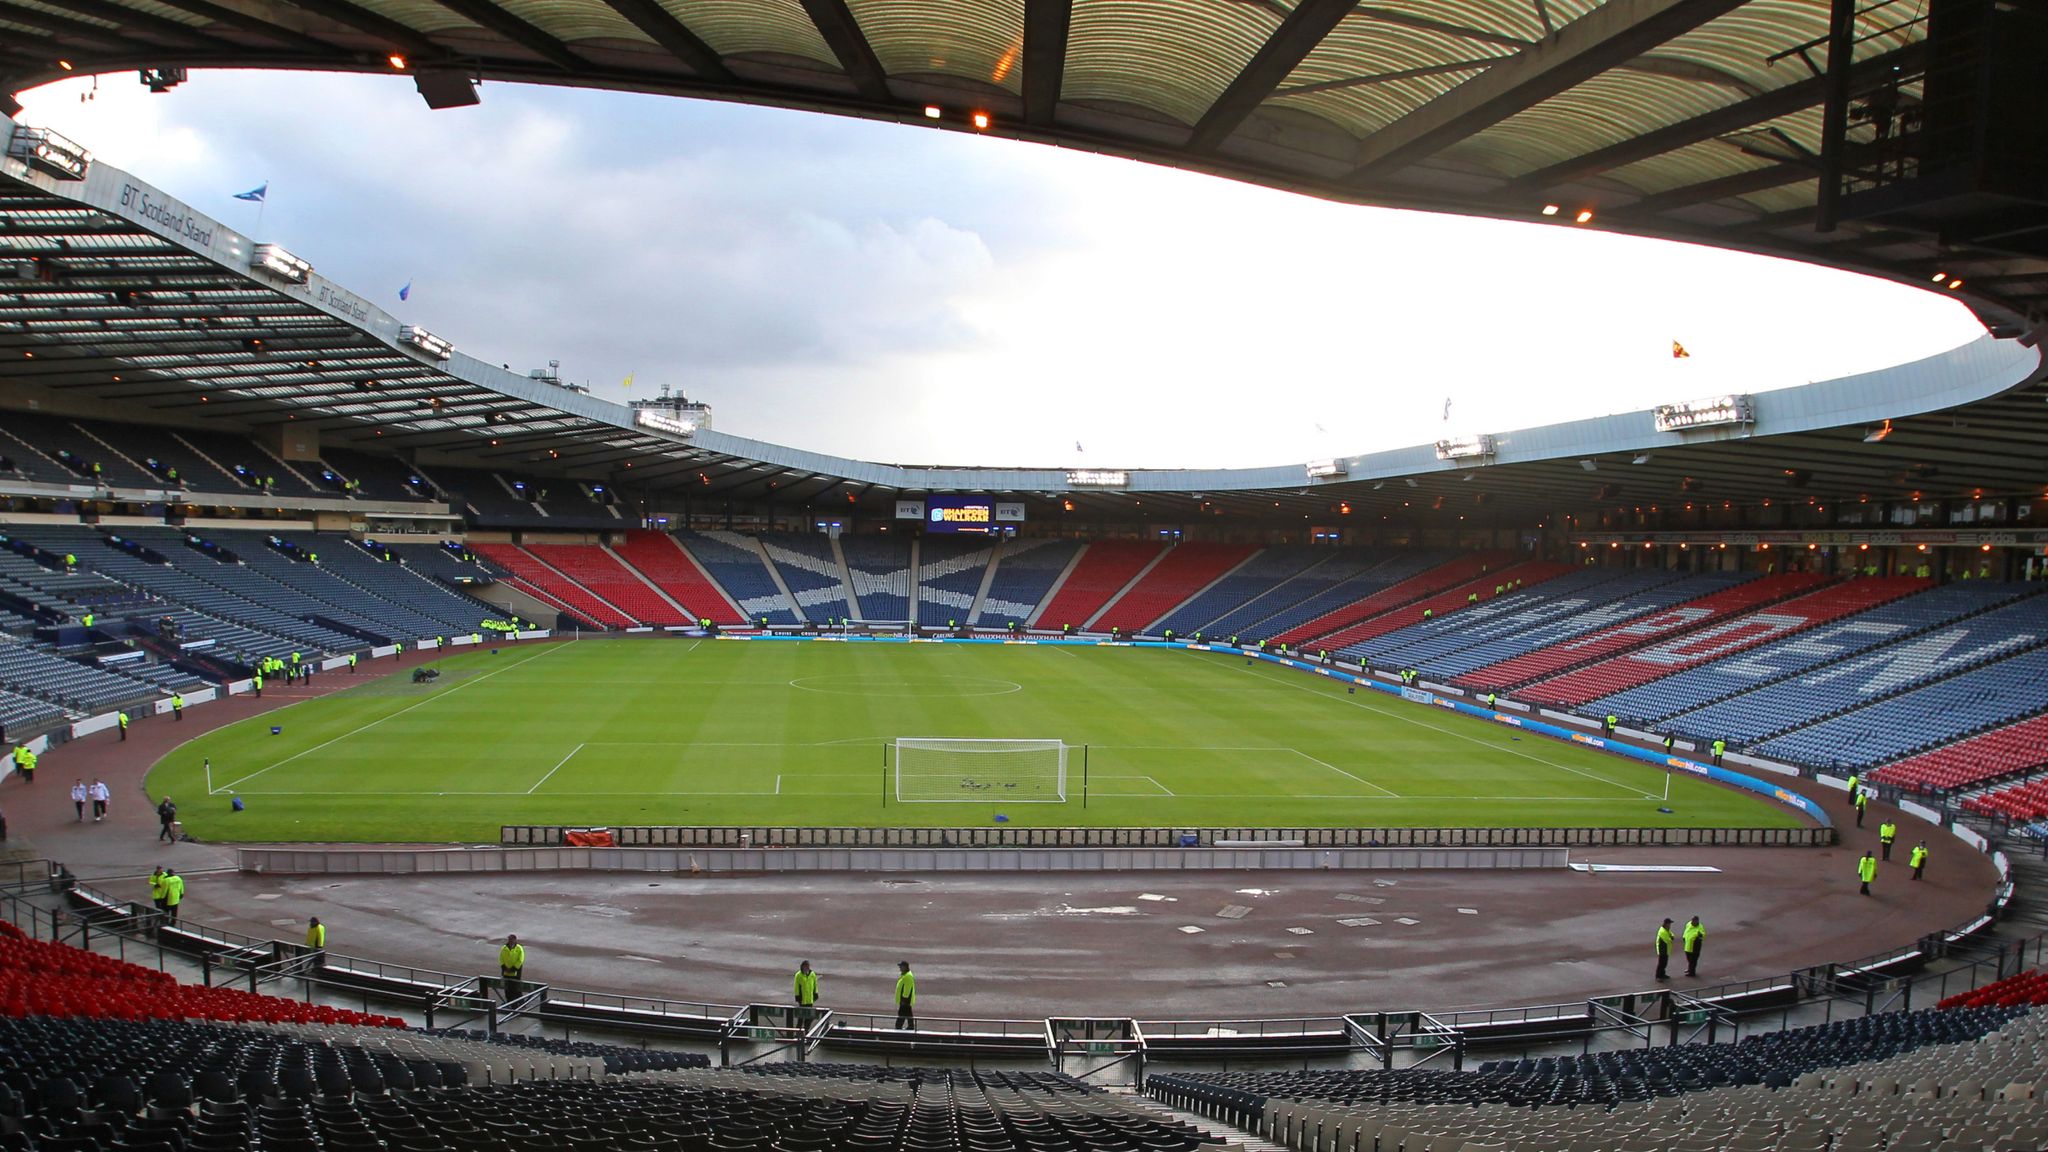 Is Celtic Park, Ibrox or Hampden in FIFA 18? What stadiums have been added  to the game this year?